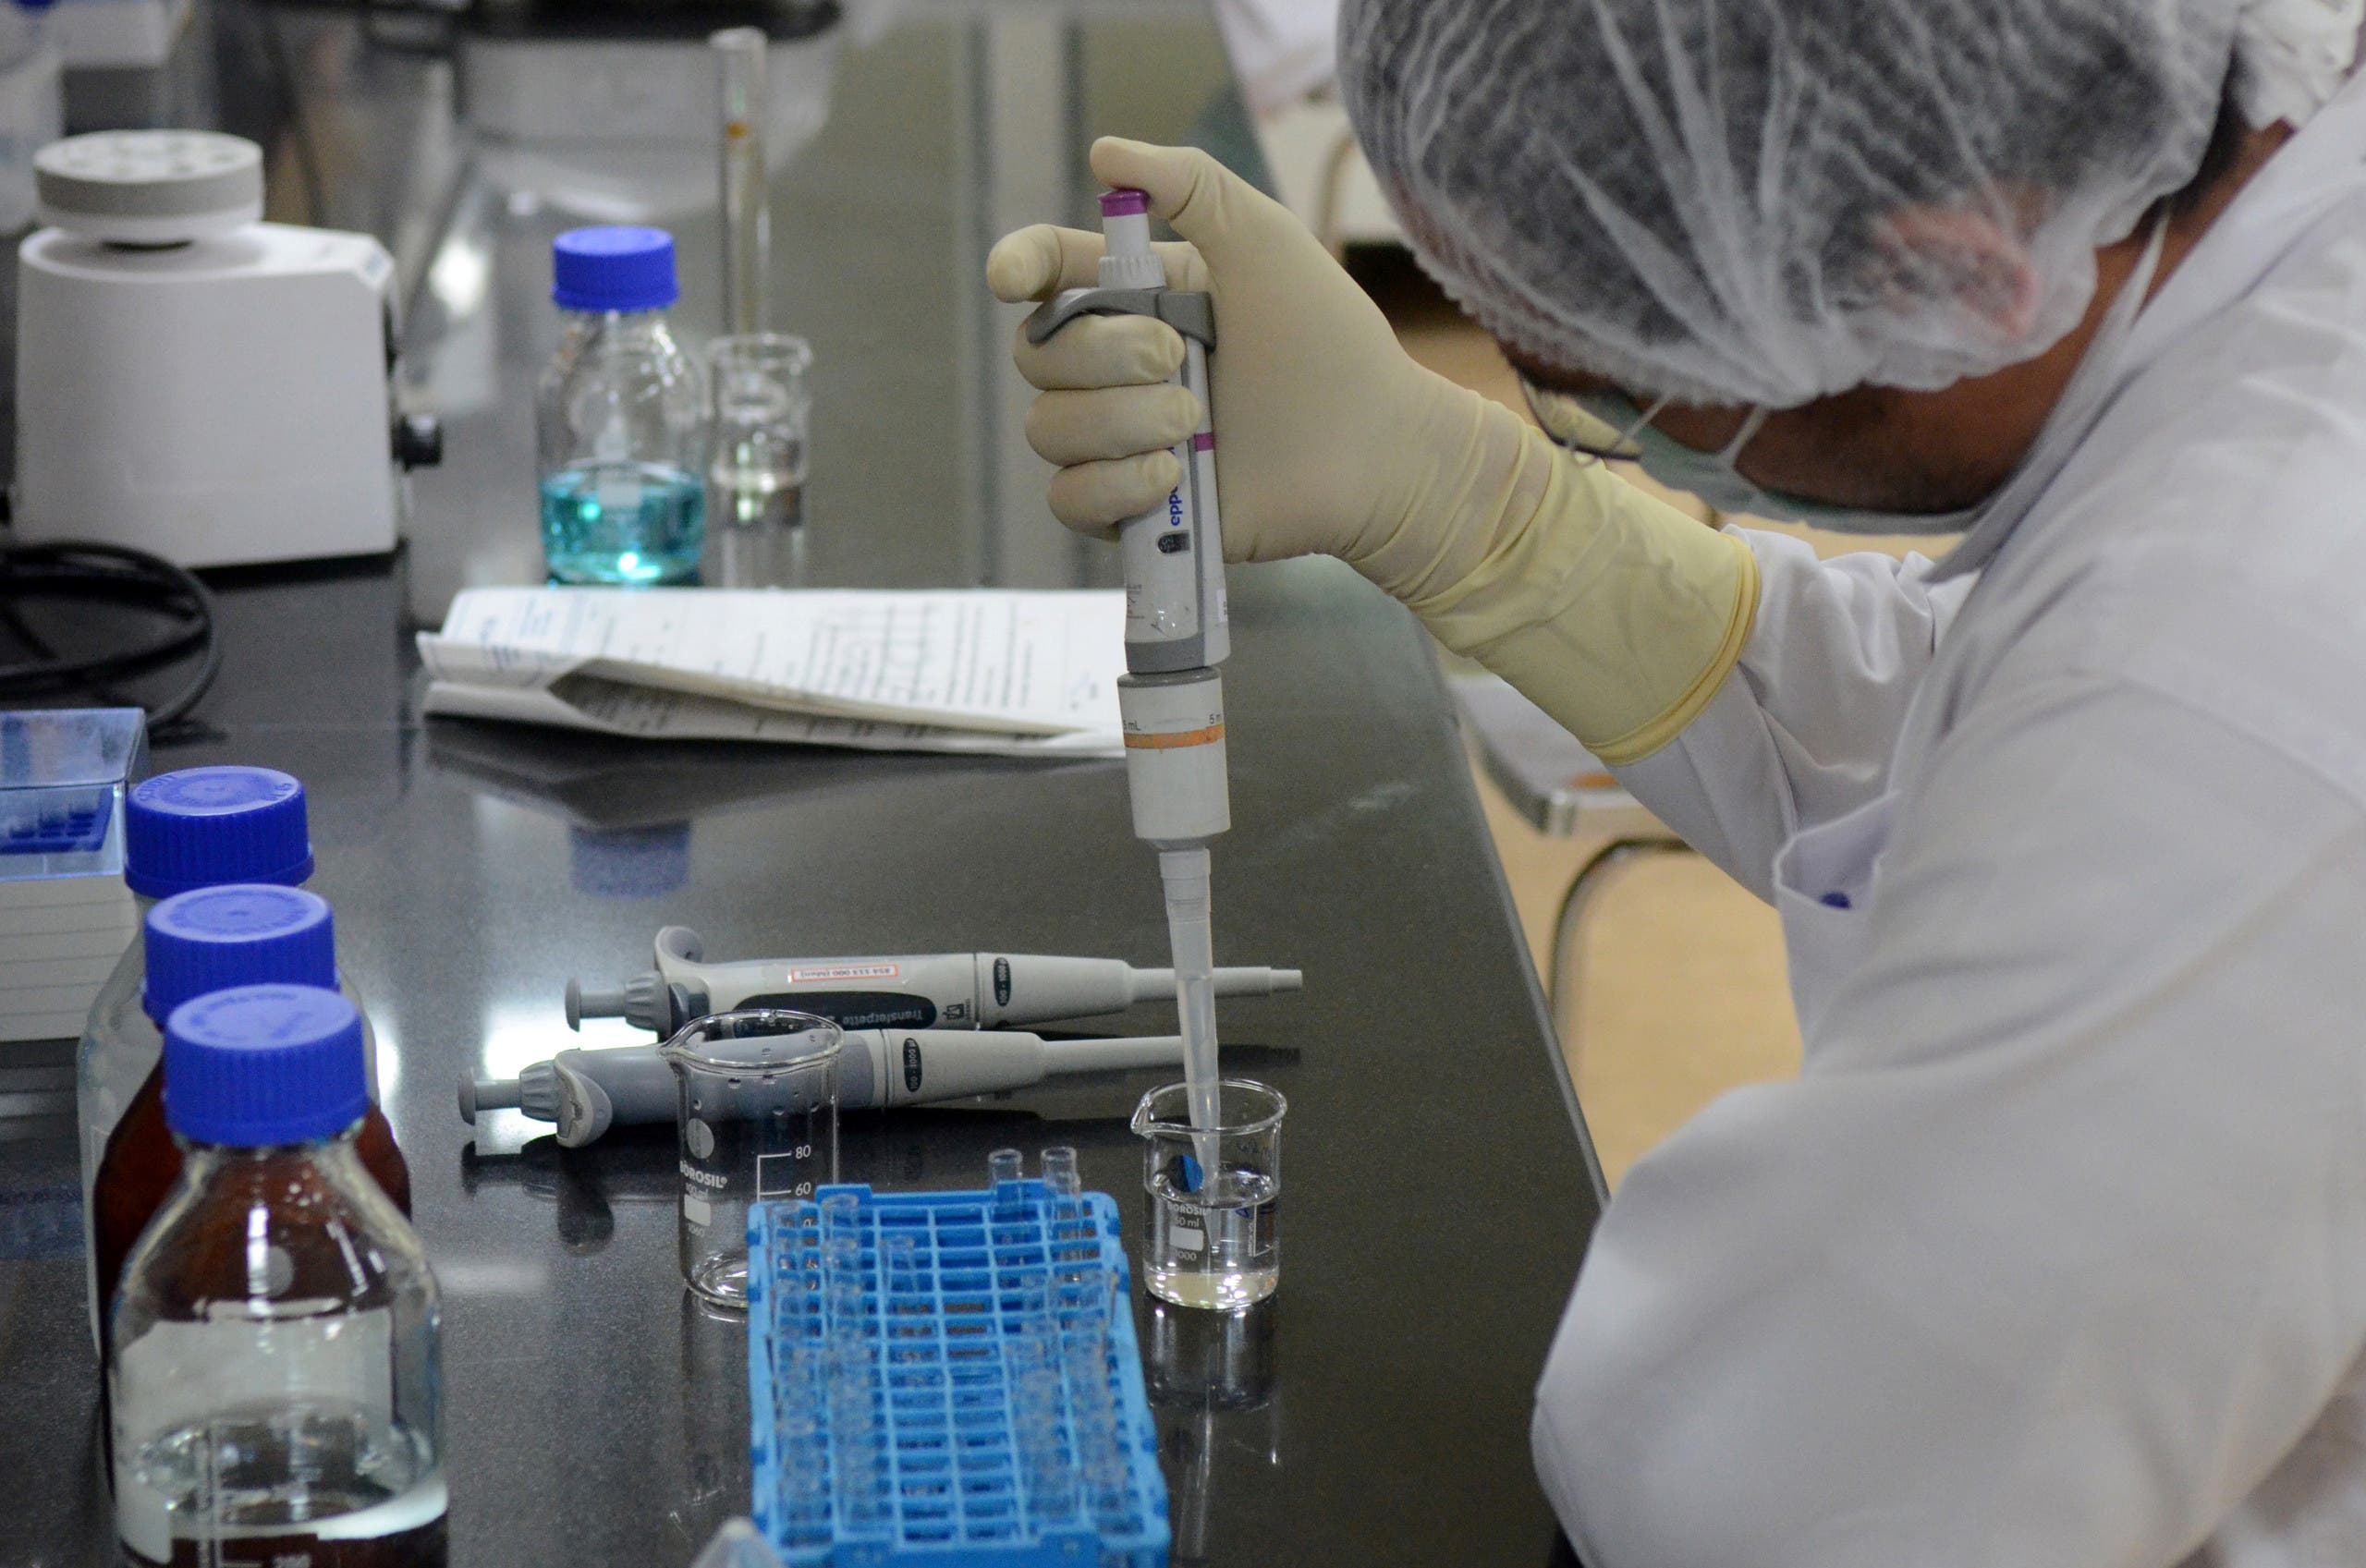 A research scientist works inside a laboratory of India's Serum Institute, the world's largest maker of vaccines, which is working on vaccines against the coronavirus disease (COVID-19) in Pune, India, May 18, 2020. (Reuters)